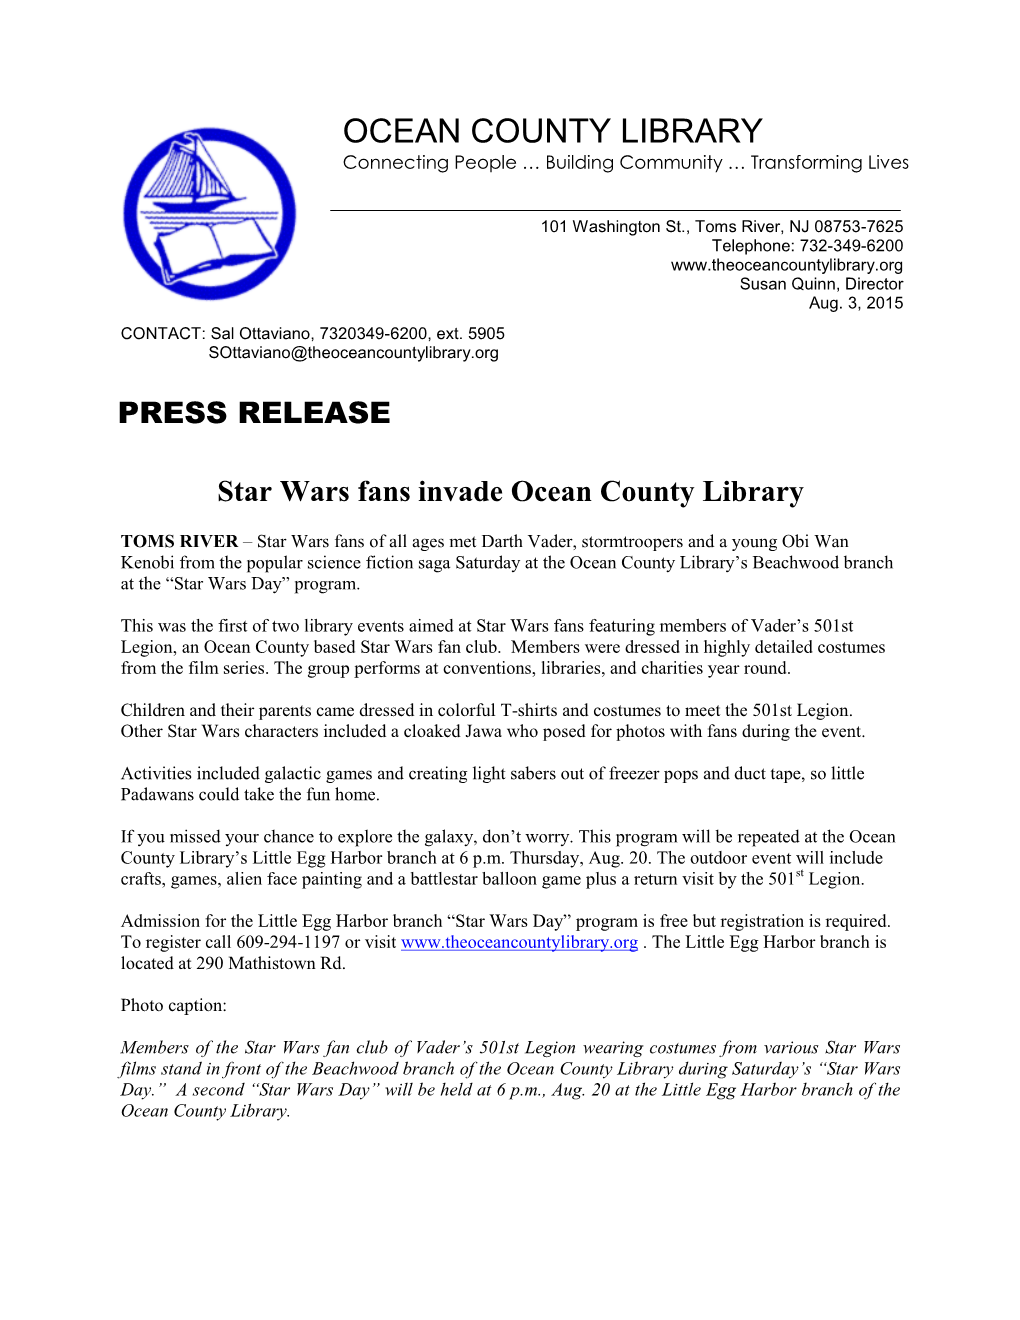 Star Wars Fans Invade Ocean County Library